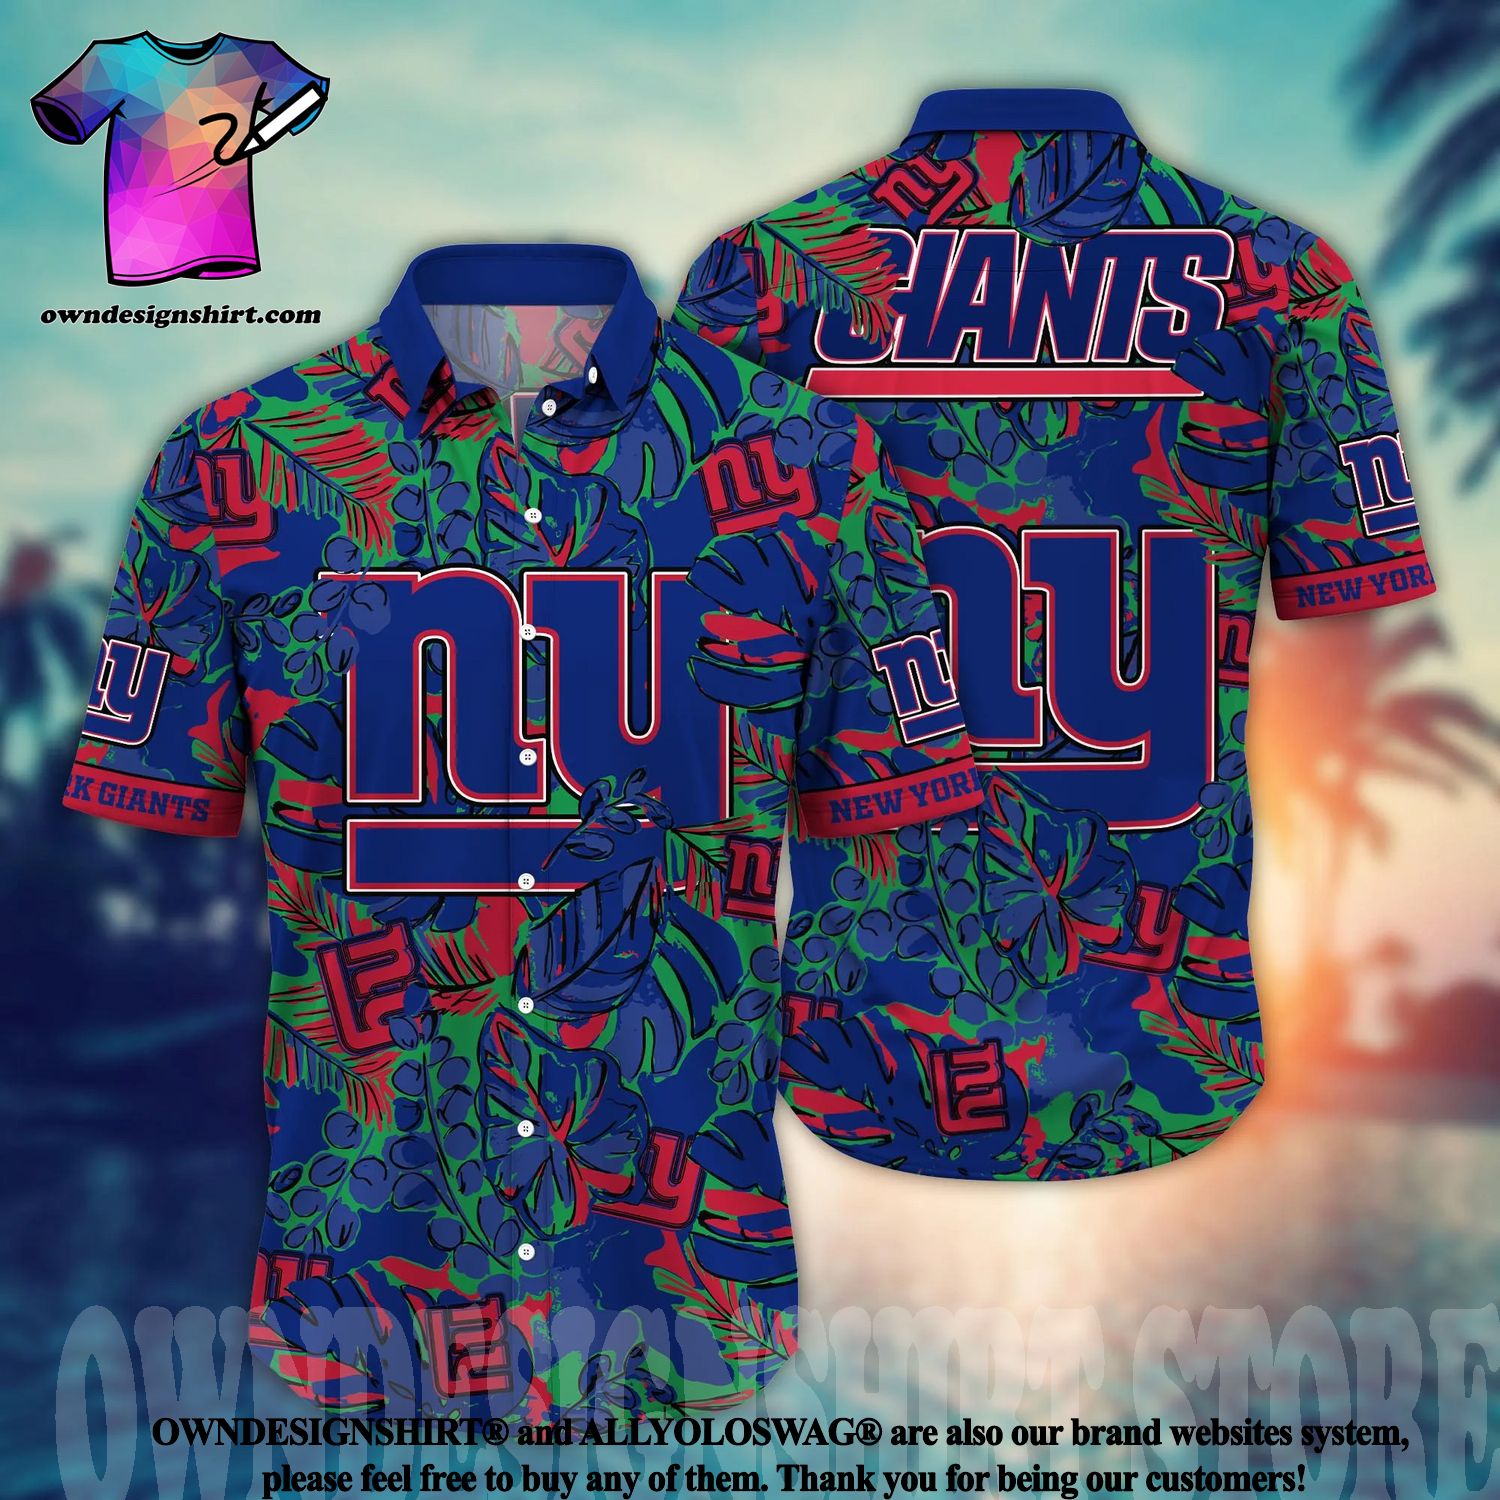 classic giants jersey